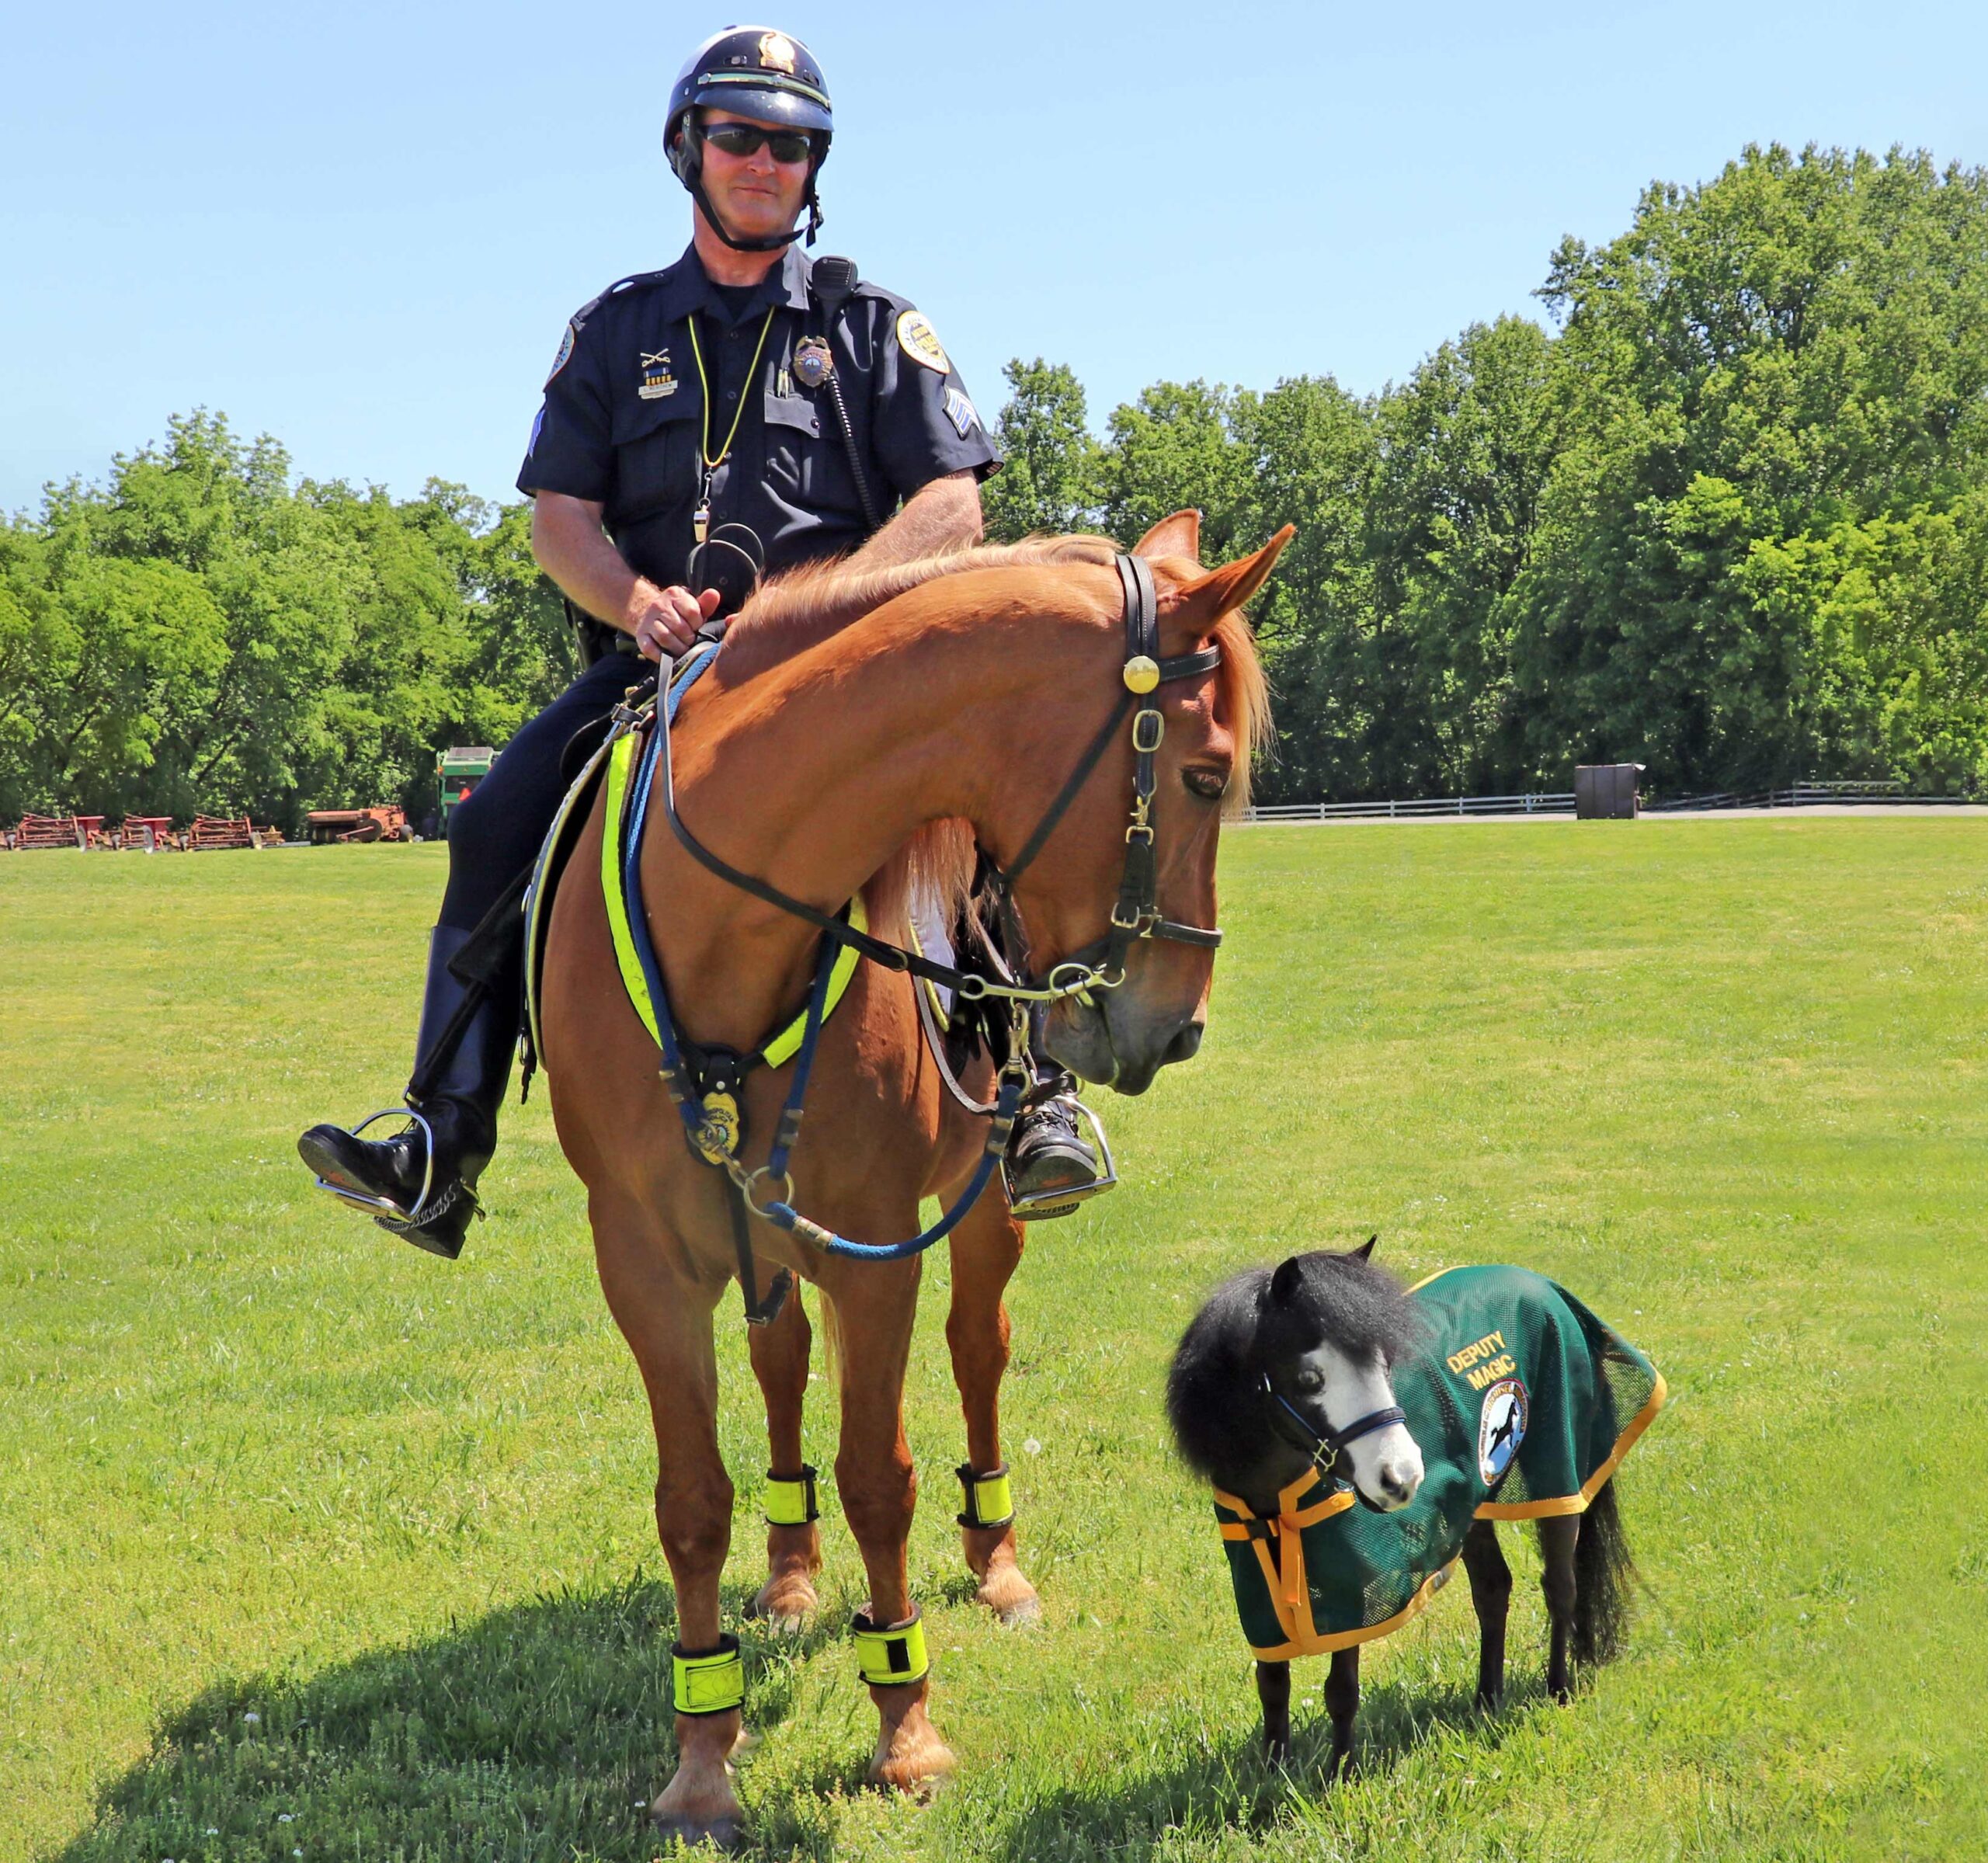 An officer on horseback next to a miniature therapy horse.